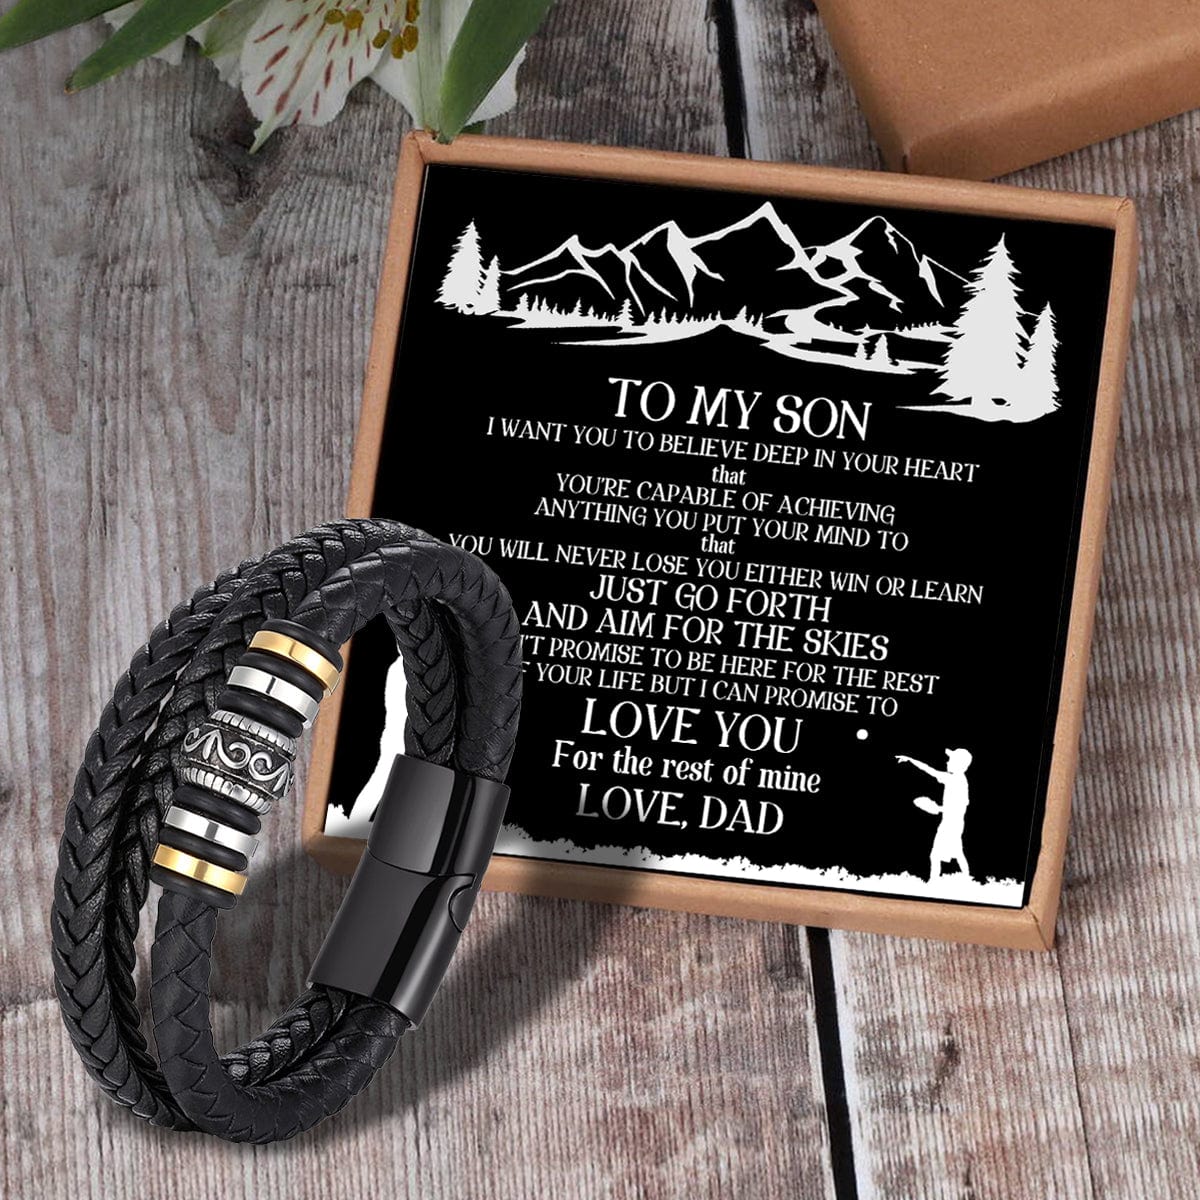 Bracelets For Son Dad To Son - Believe Deep In Your Heart Braided Leather Bracelet Black GiveMe-Gifts